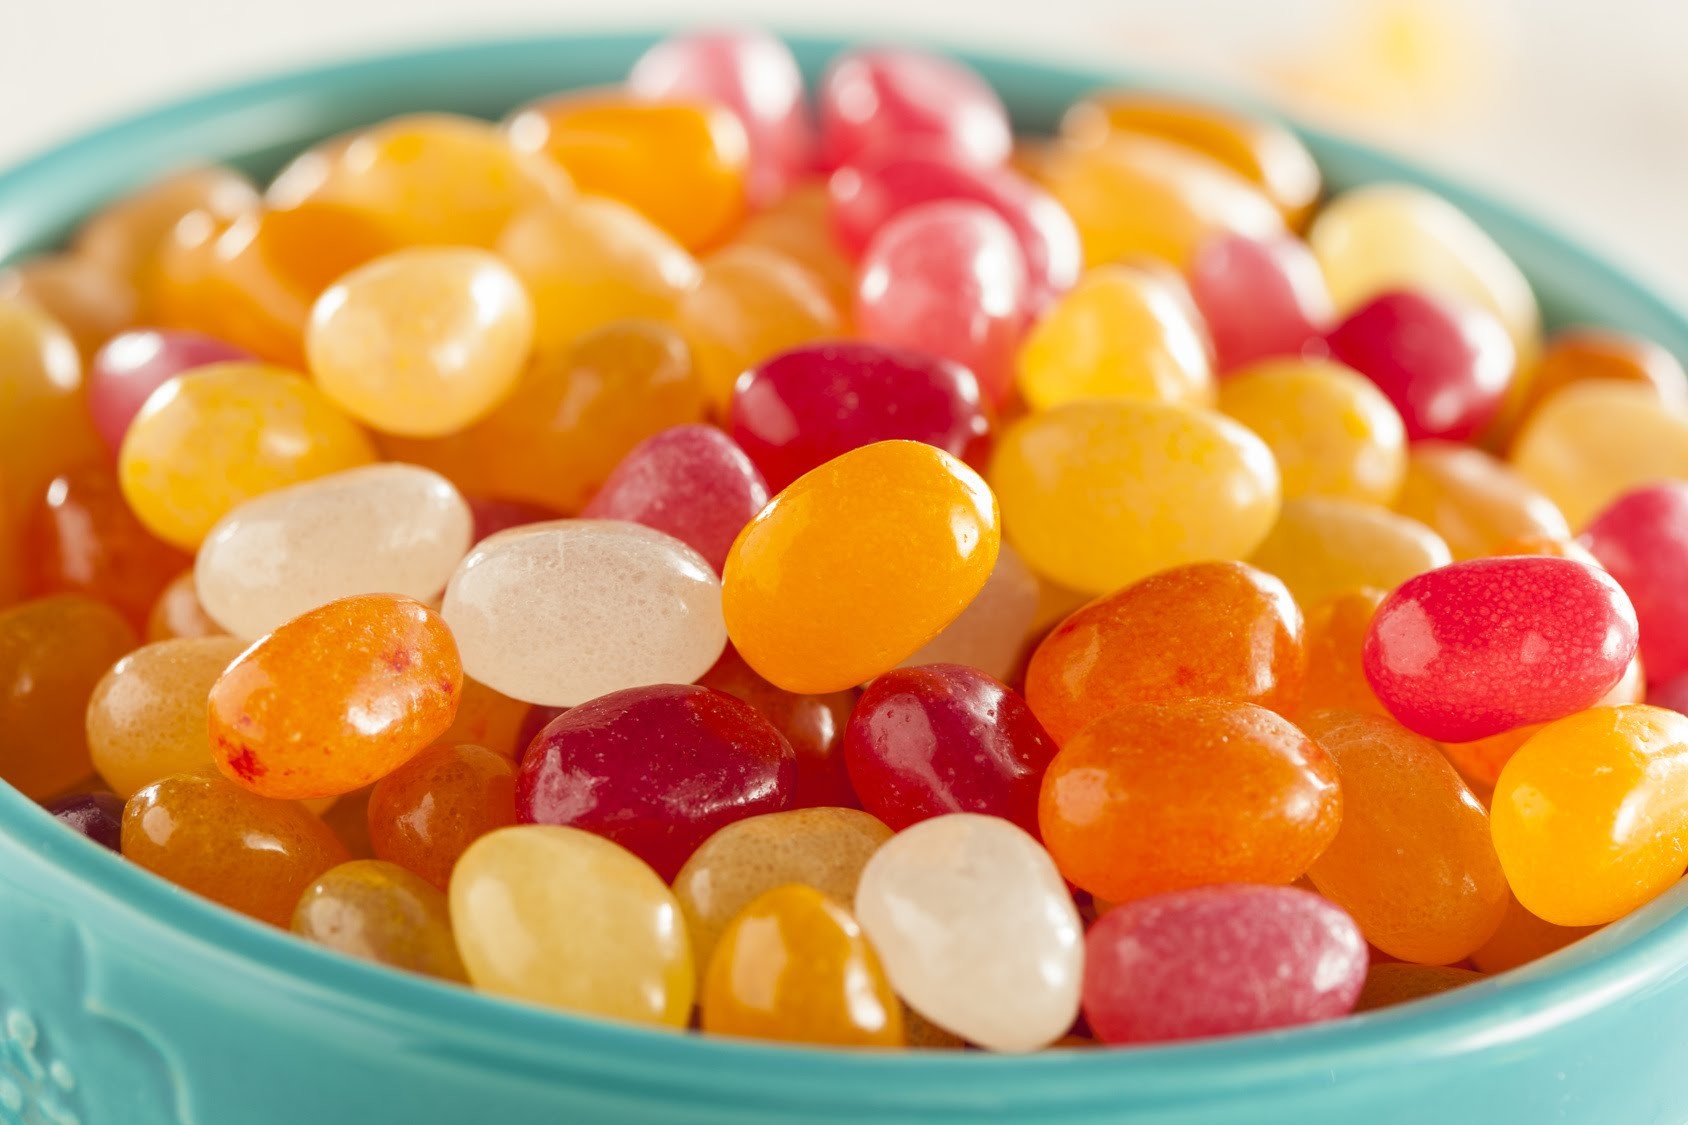 How To Make Jelly Beans.